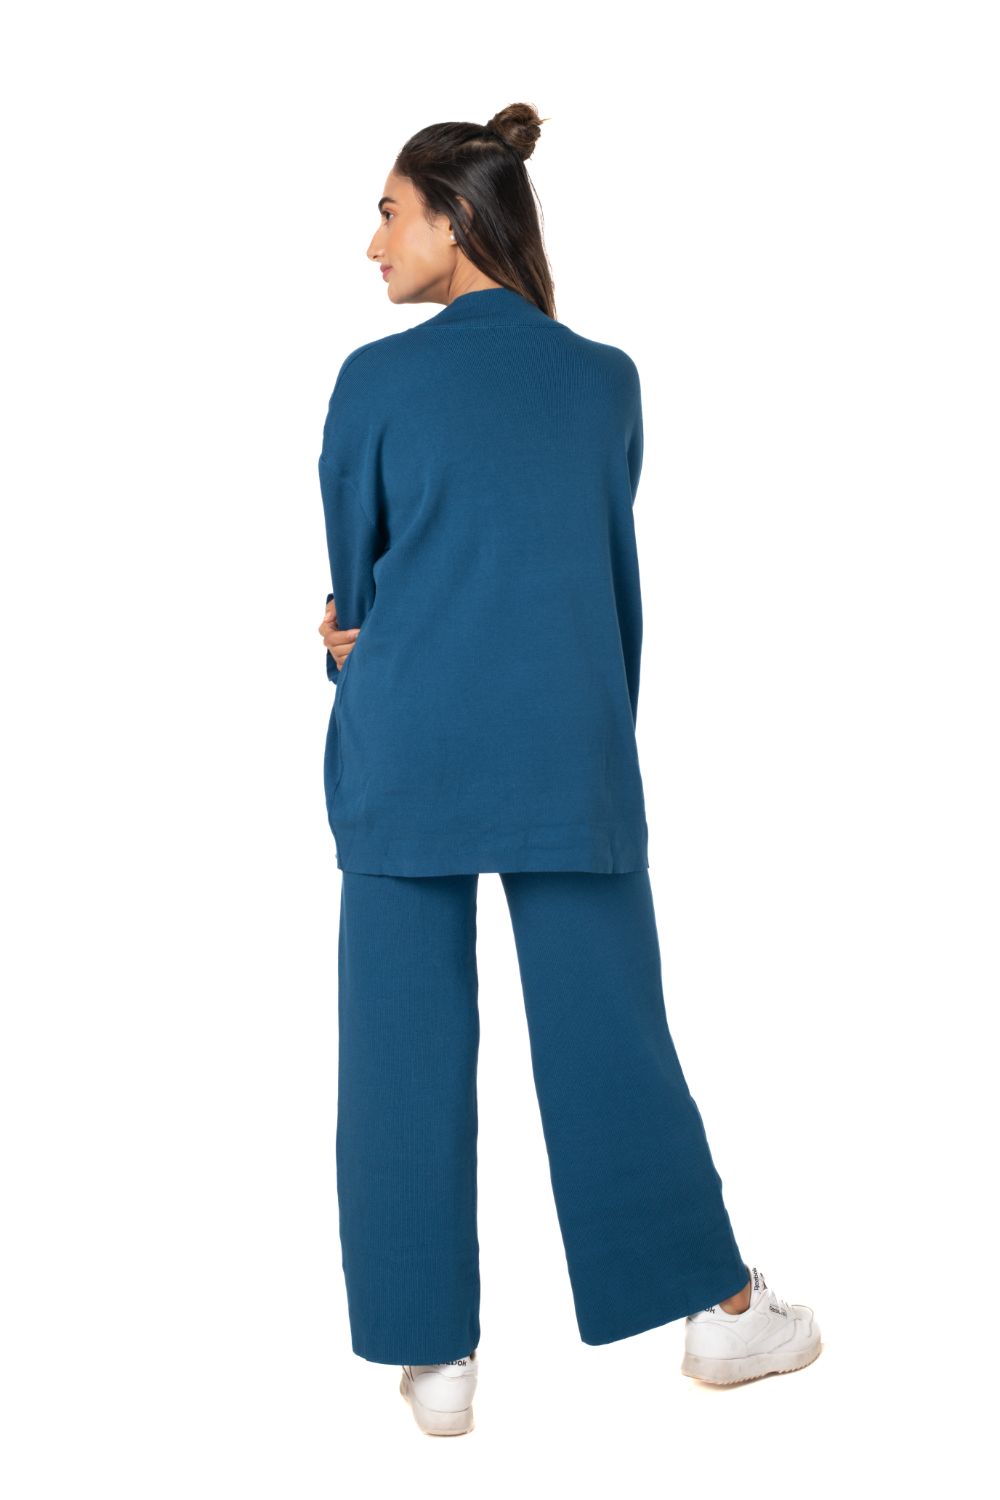 Cosy Airport Ready Coord Set full sleeve azure blue lounge wear featured